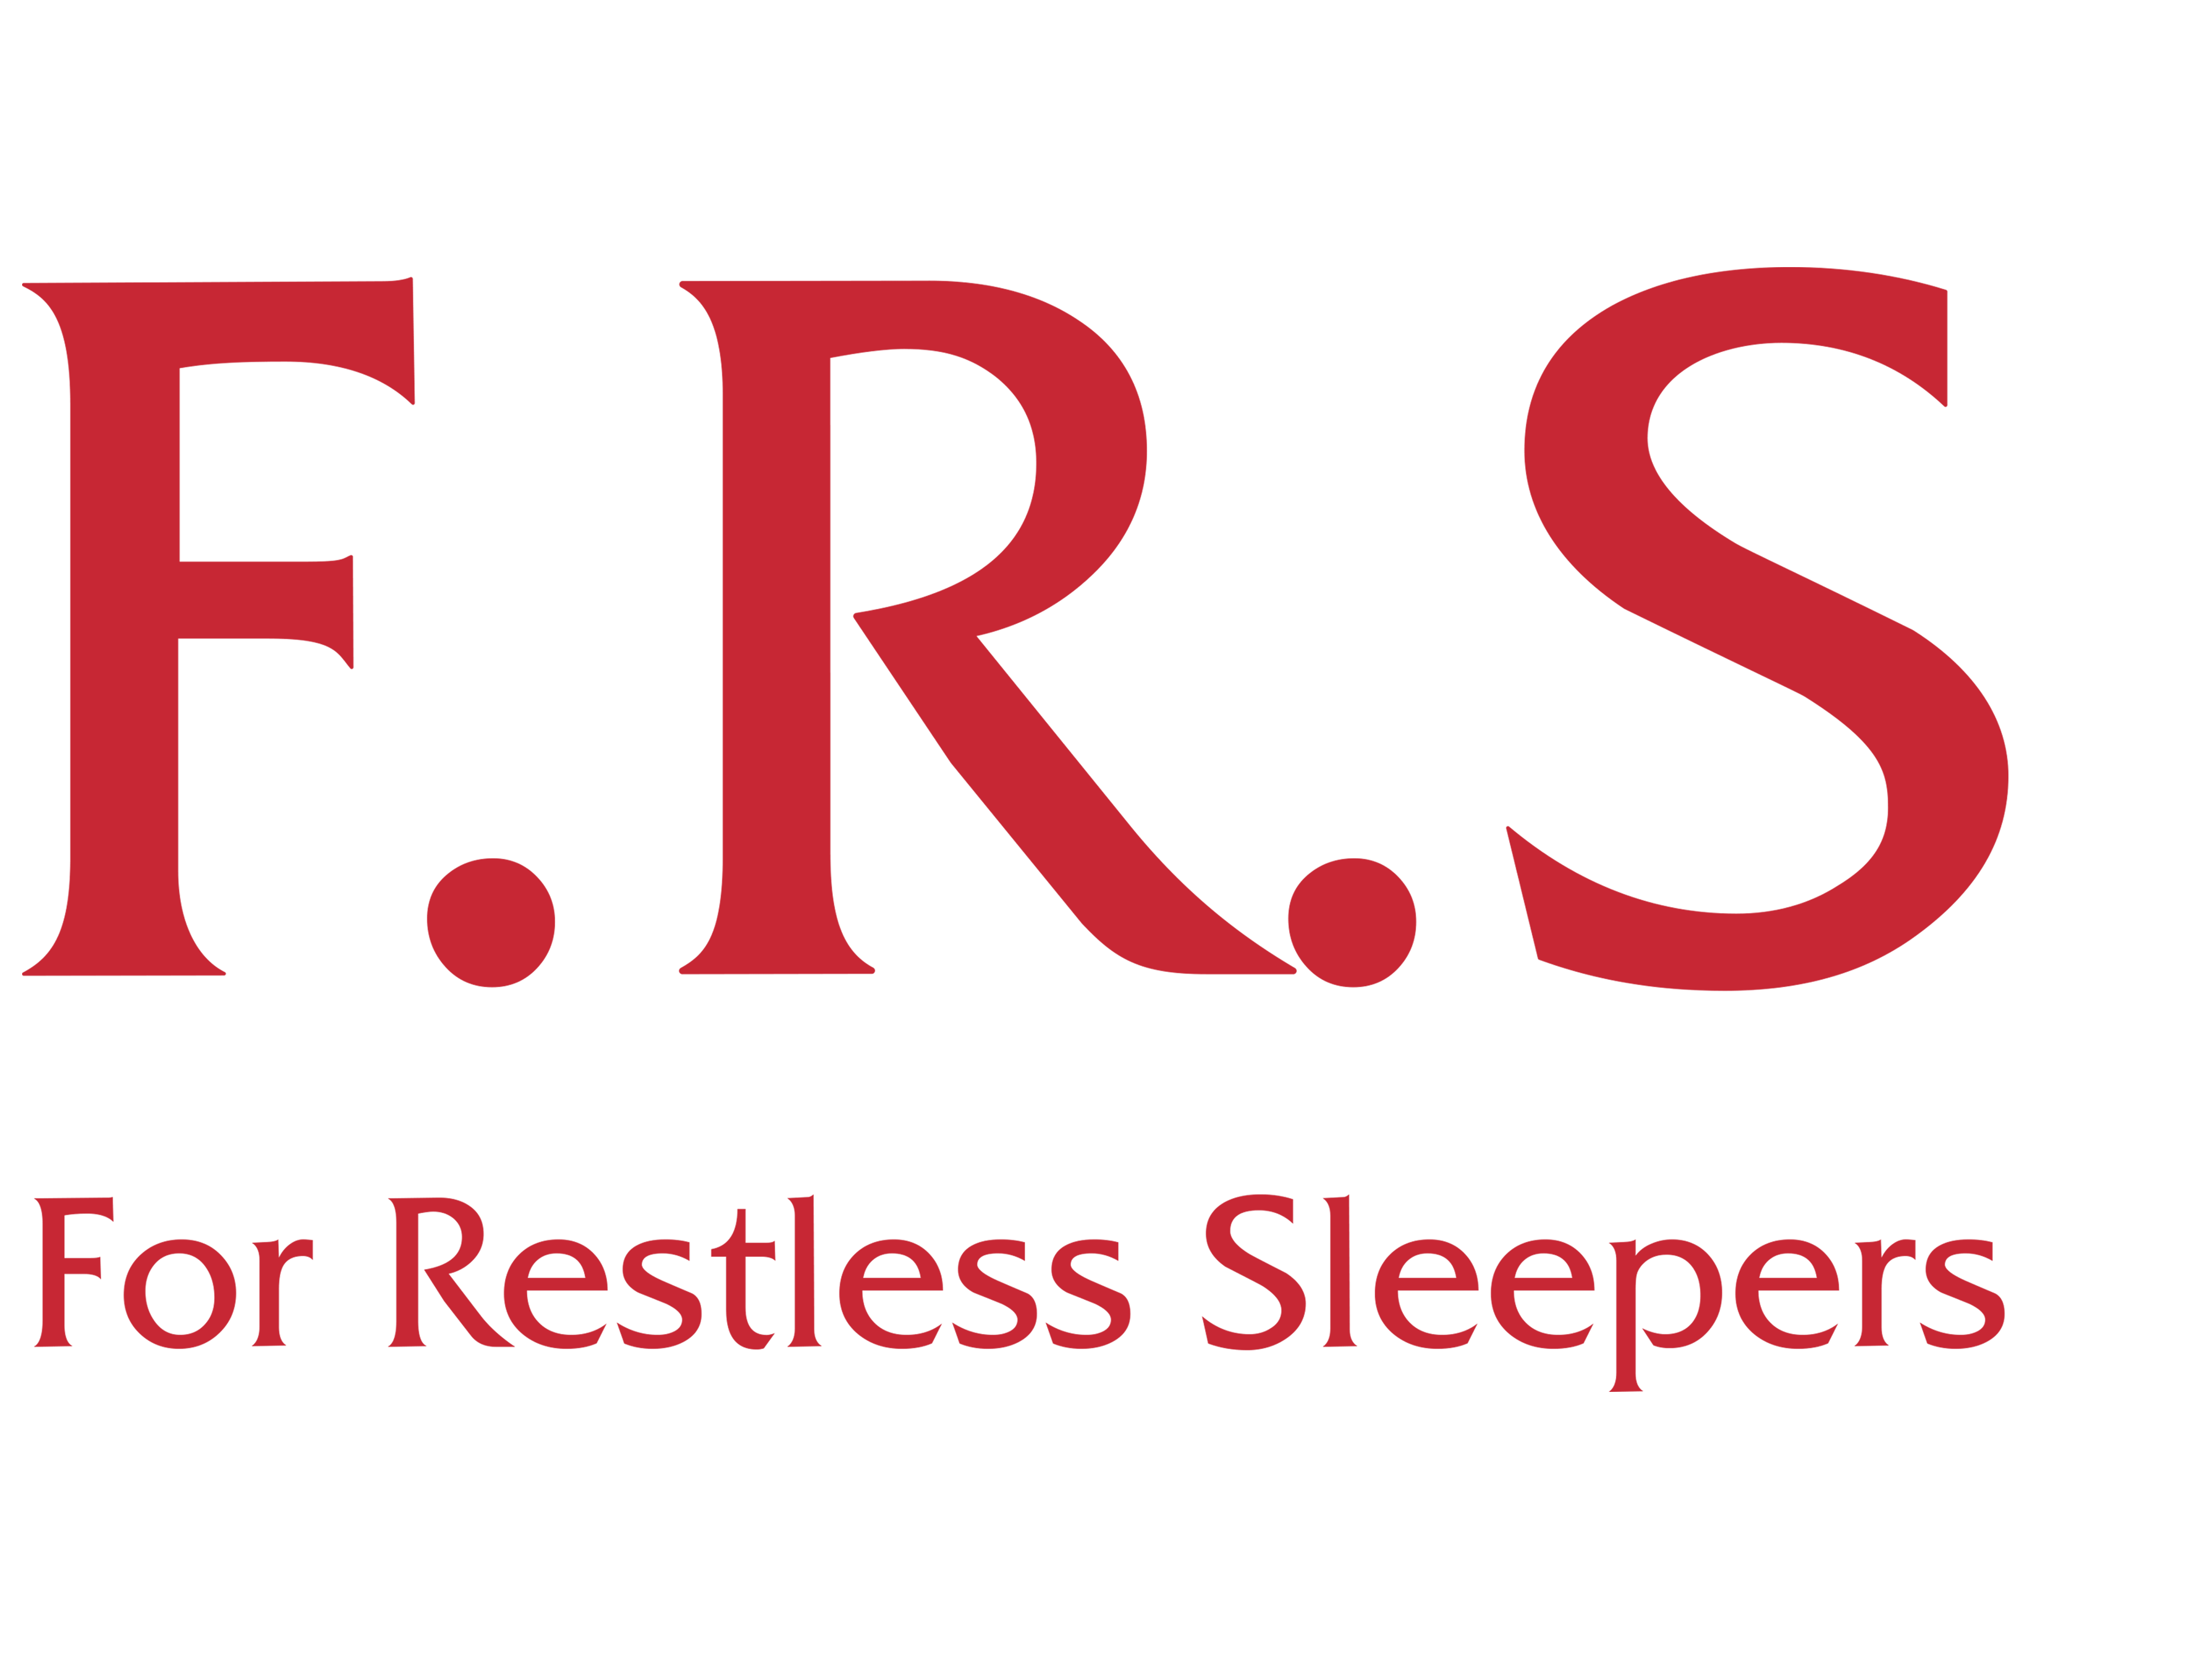 FRS Logo - F.R.S For Restless Sleepers - F.R.S